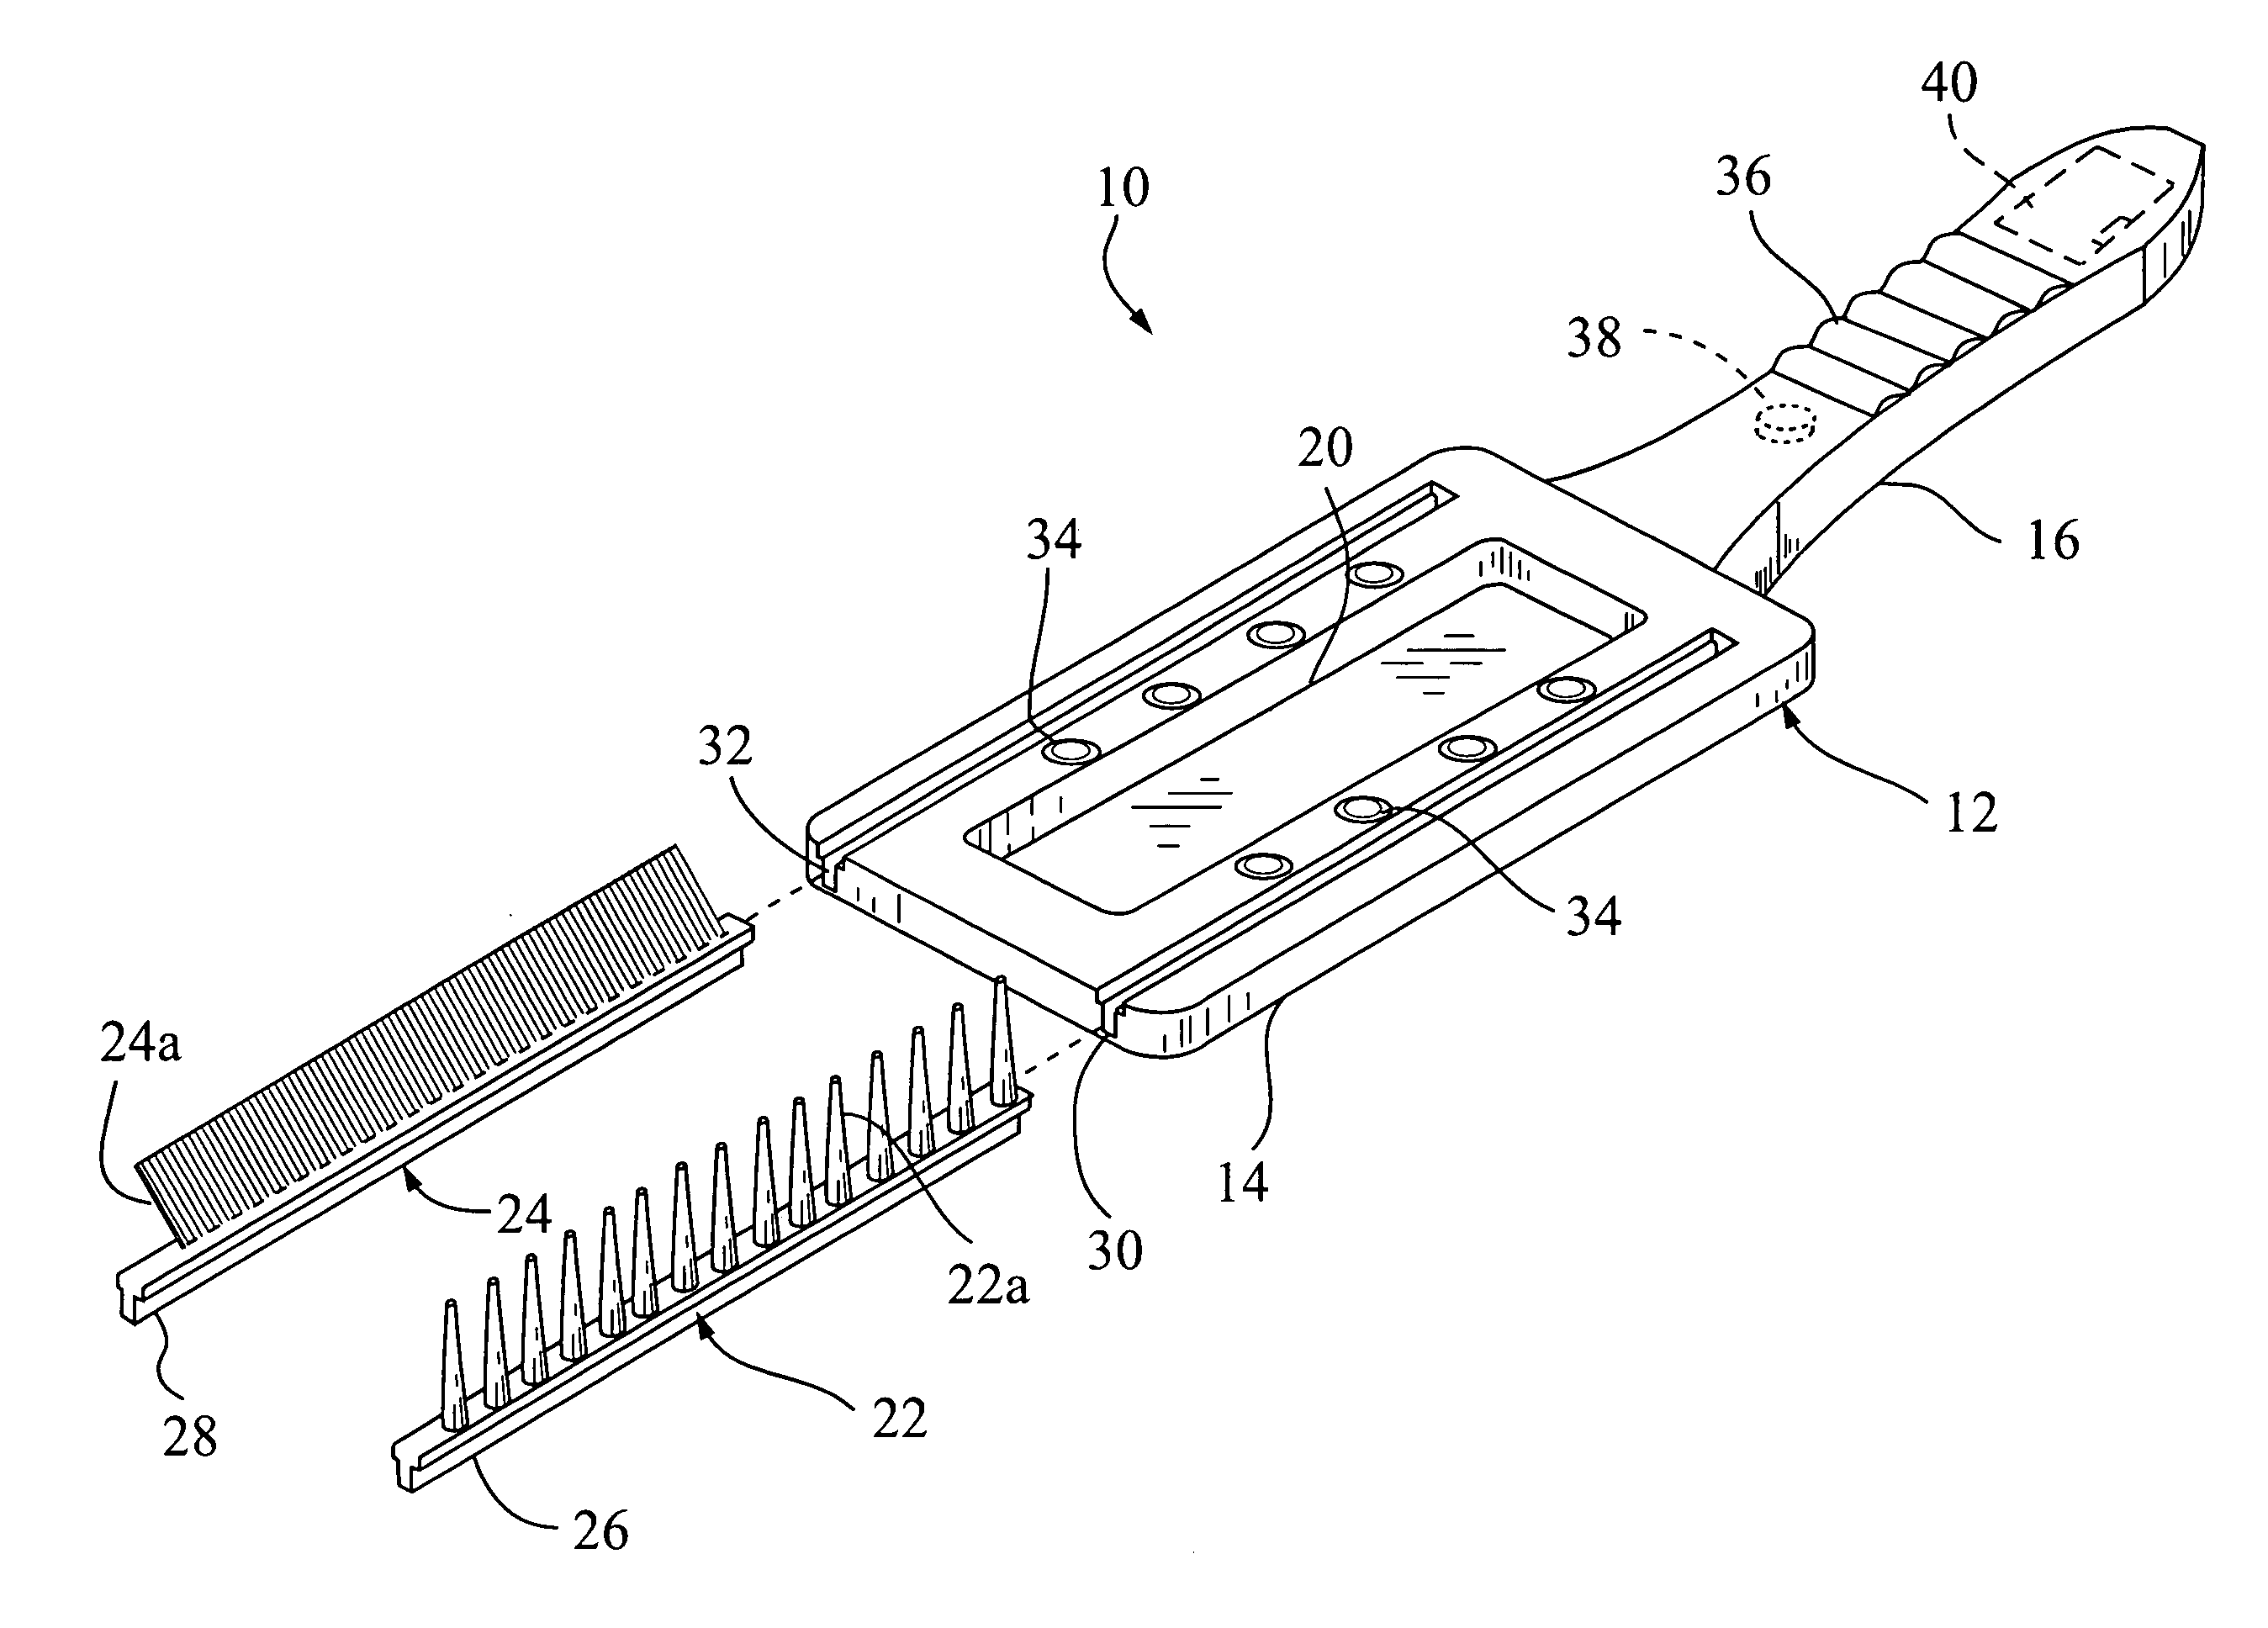 Insect locator and removal tool